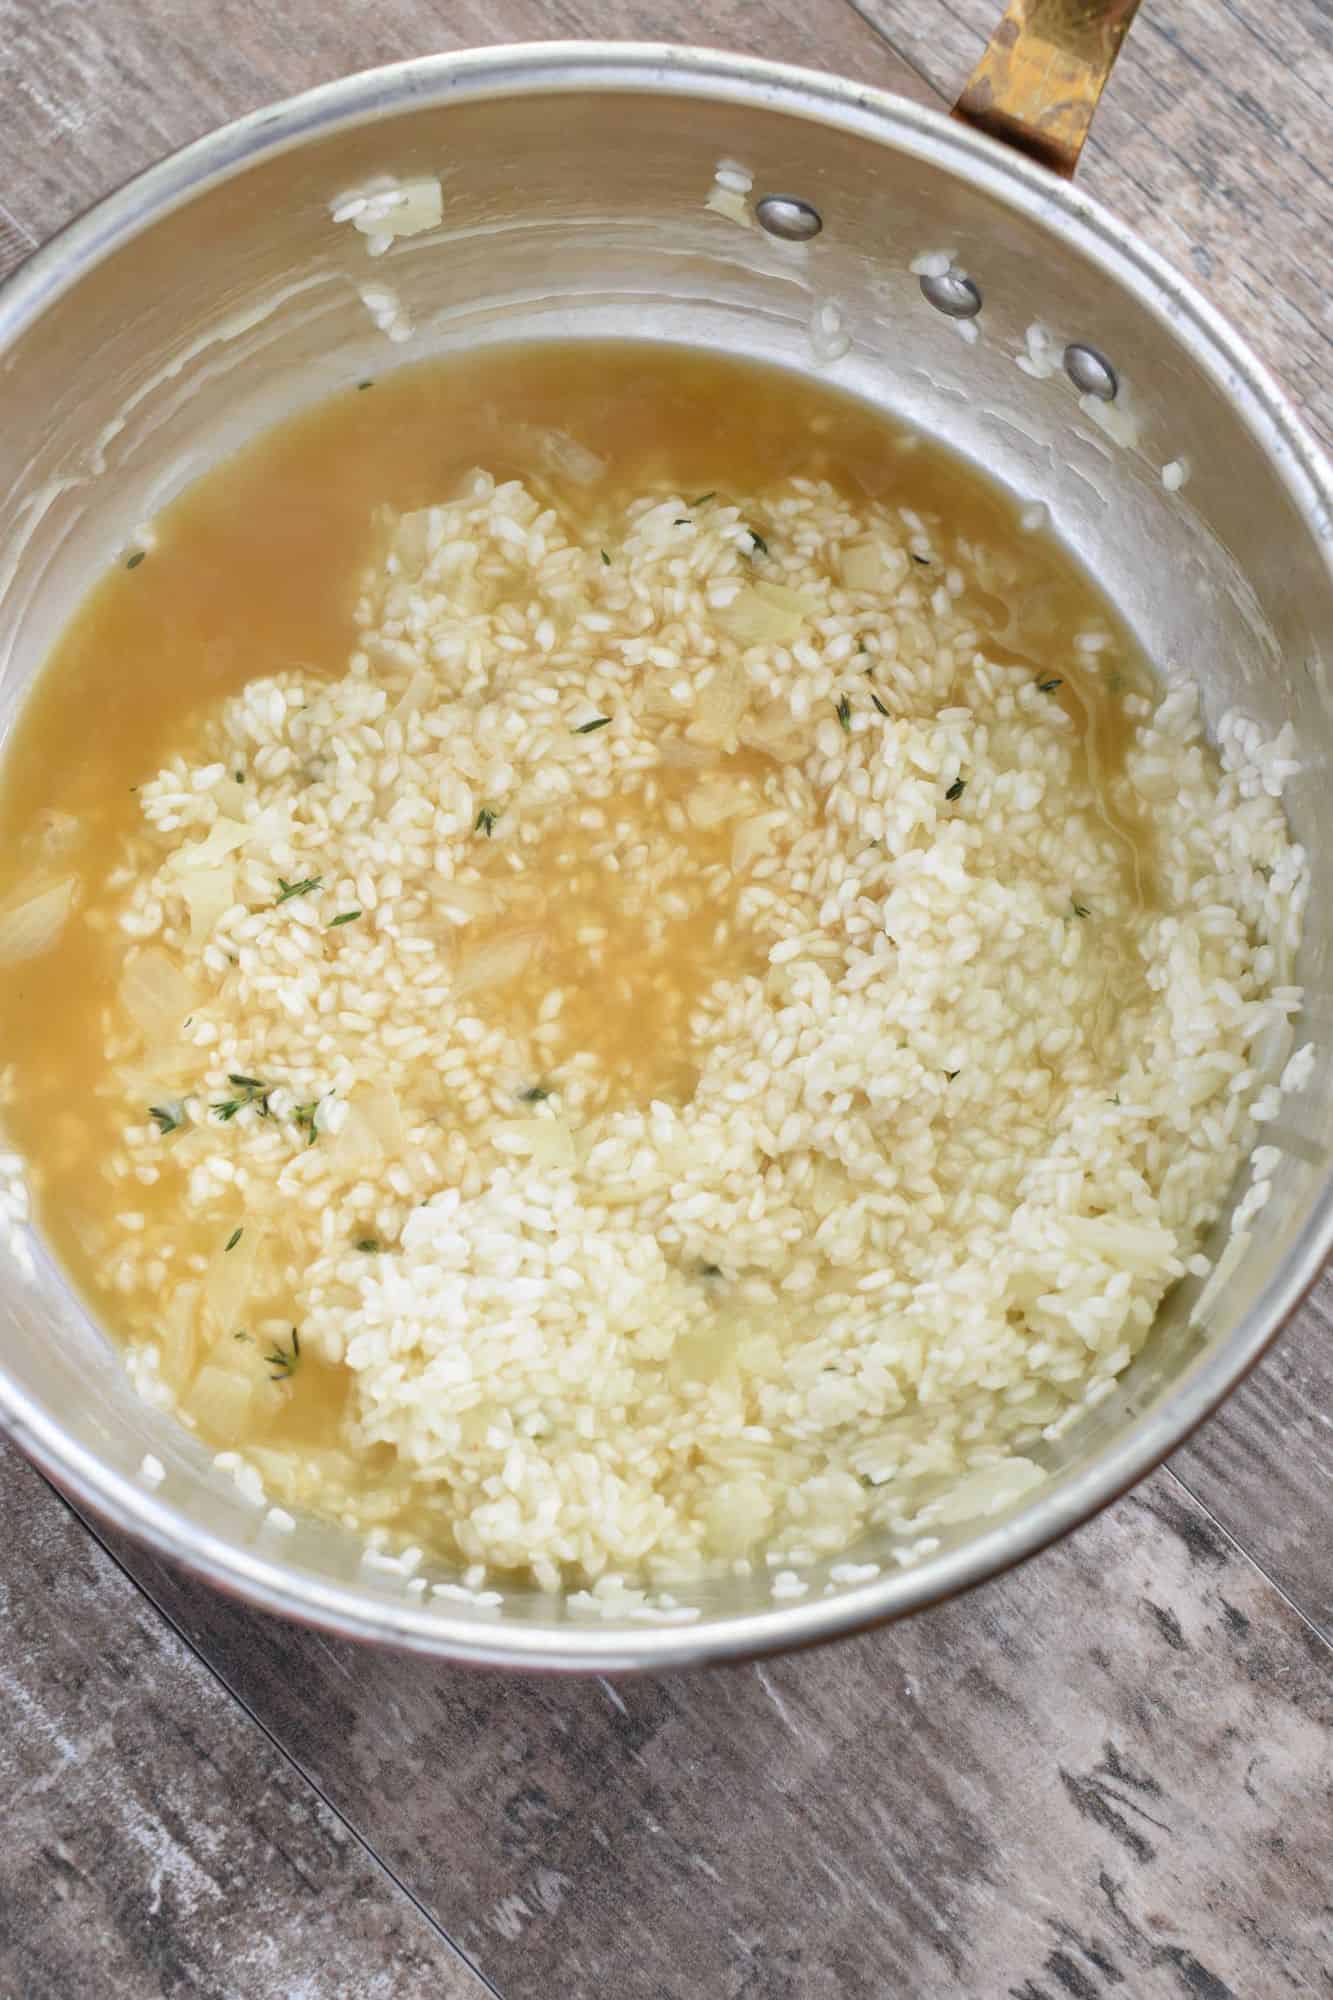 broth added to the rice in the pan